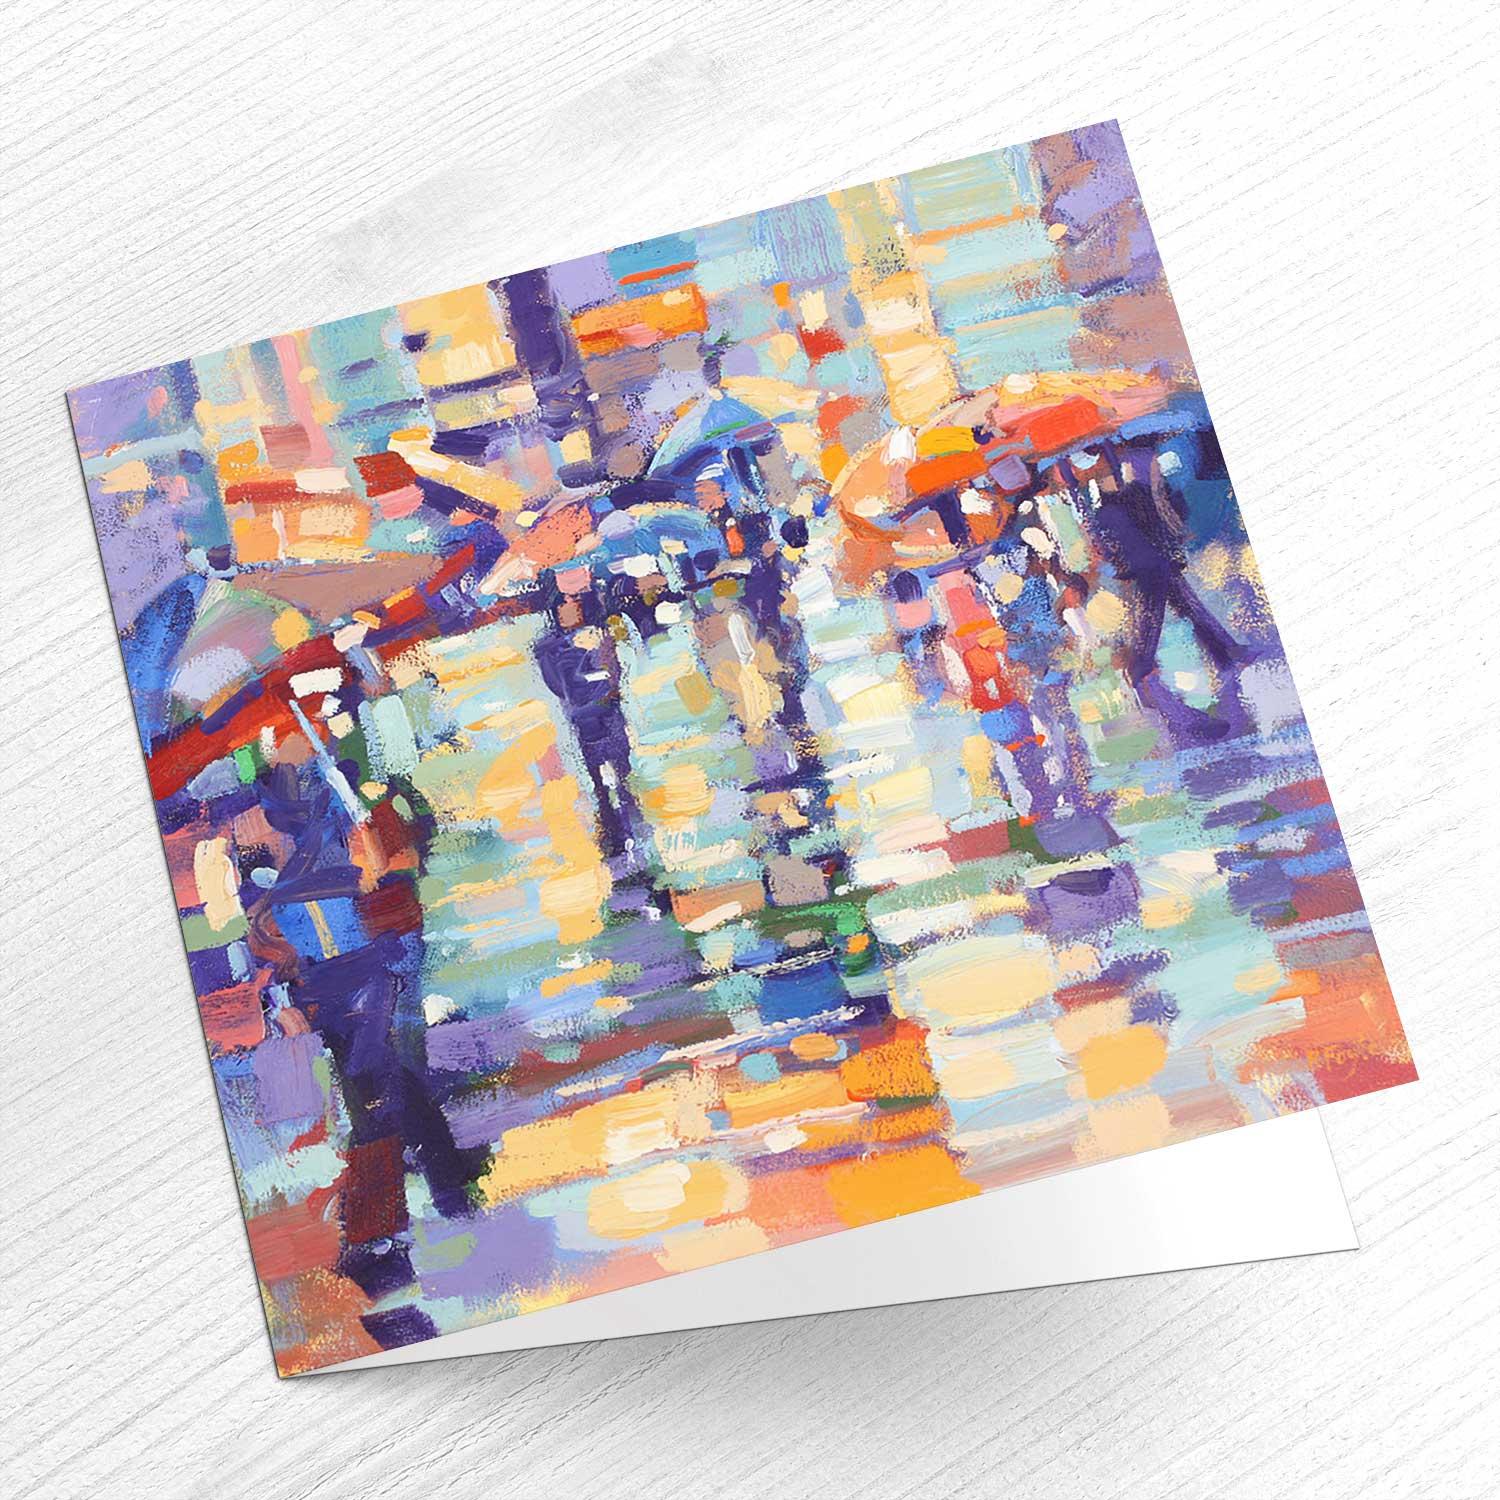 Rainy Day Greeting Card from an original painting by artist Peter Foyle